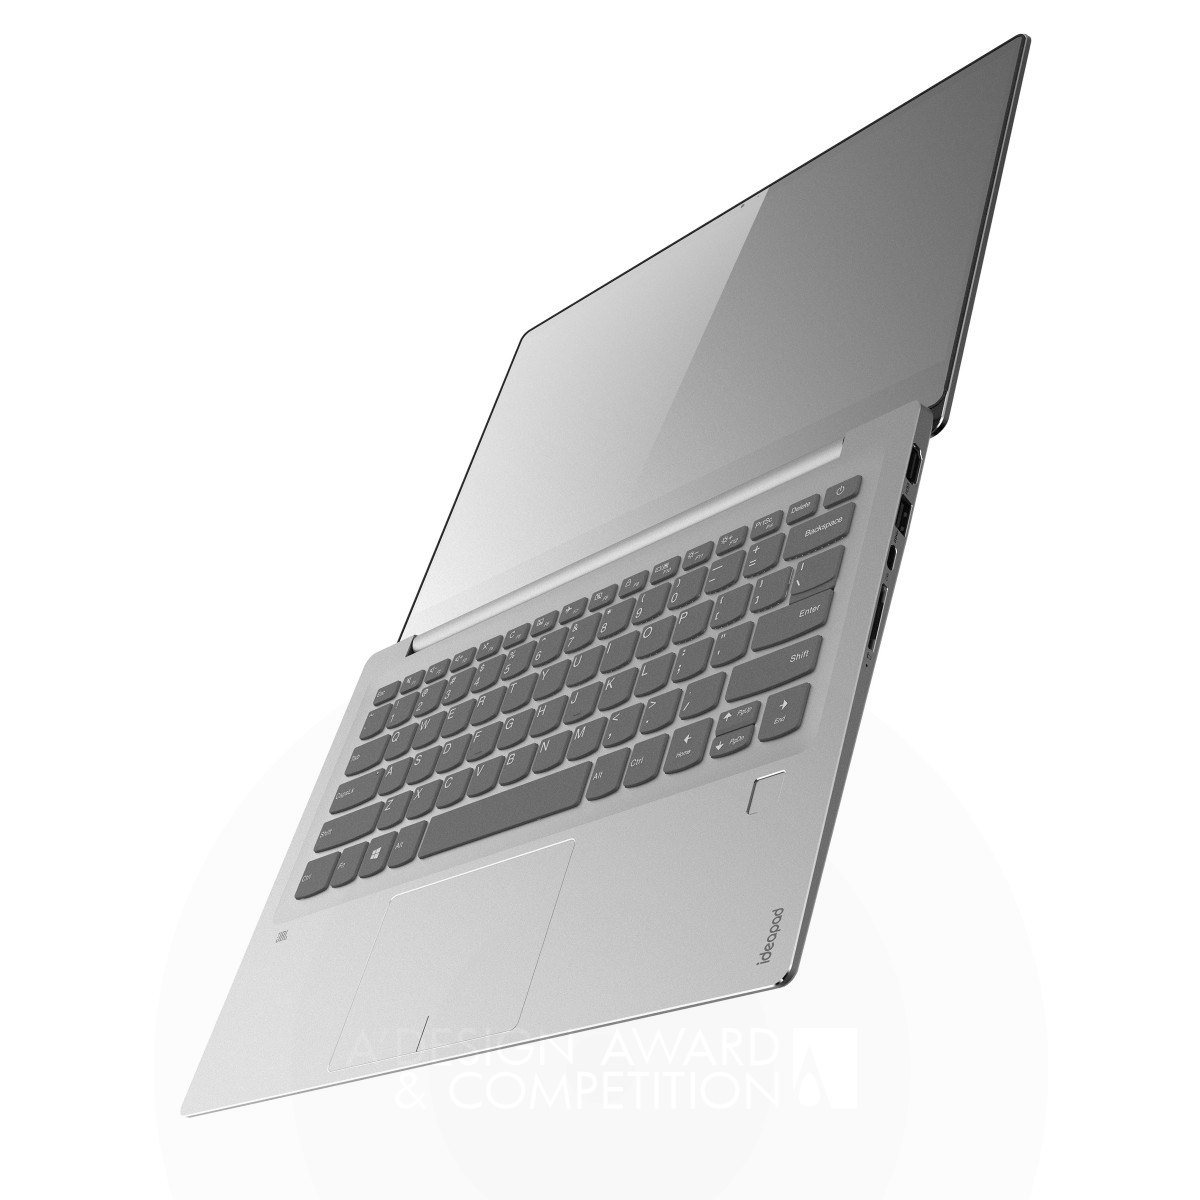 ideapad 720S-14 2017 laptop computers by Lenovo Design Group